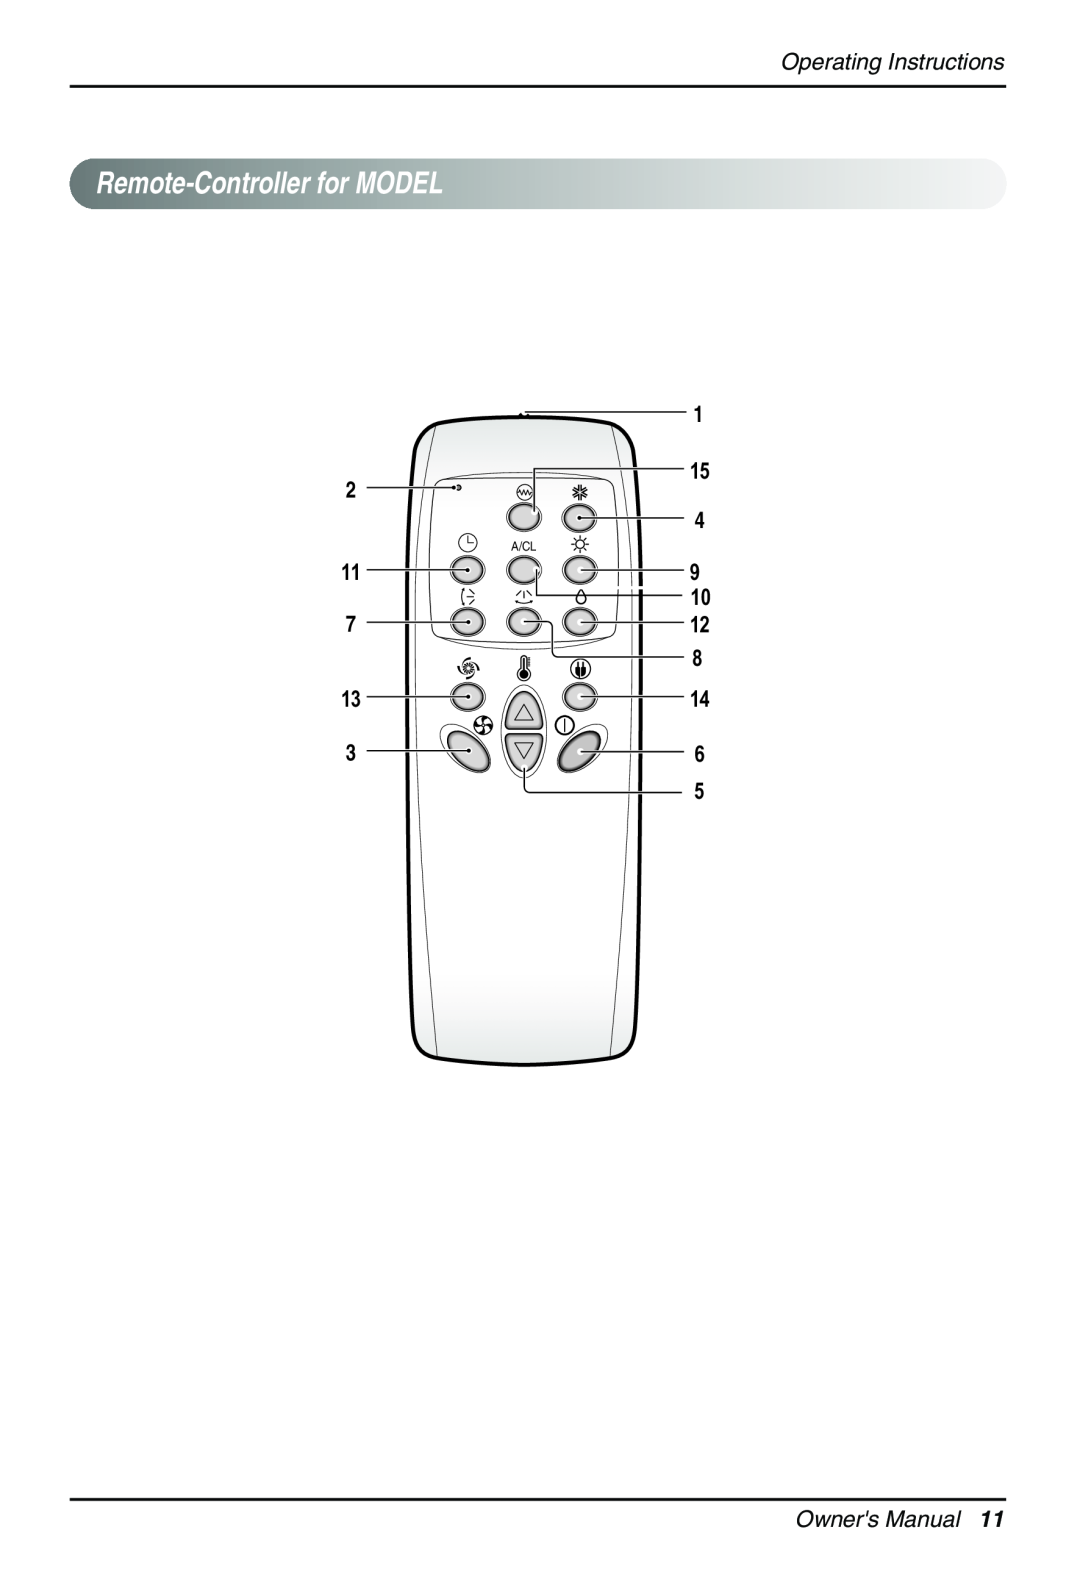 Beko LG-BKE 9300 D owner manual Remote-ControllerforMODEL, English, Operating Instructions, 1314, A/Cl 